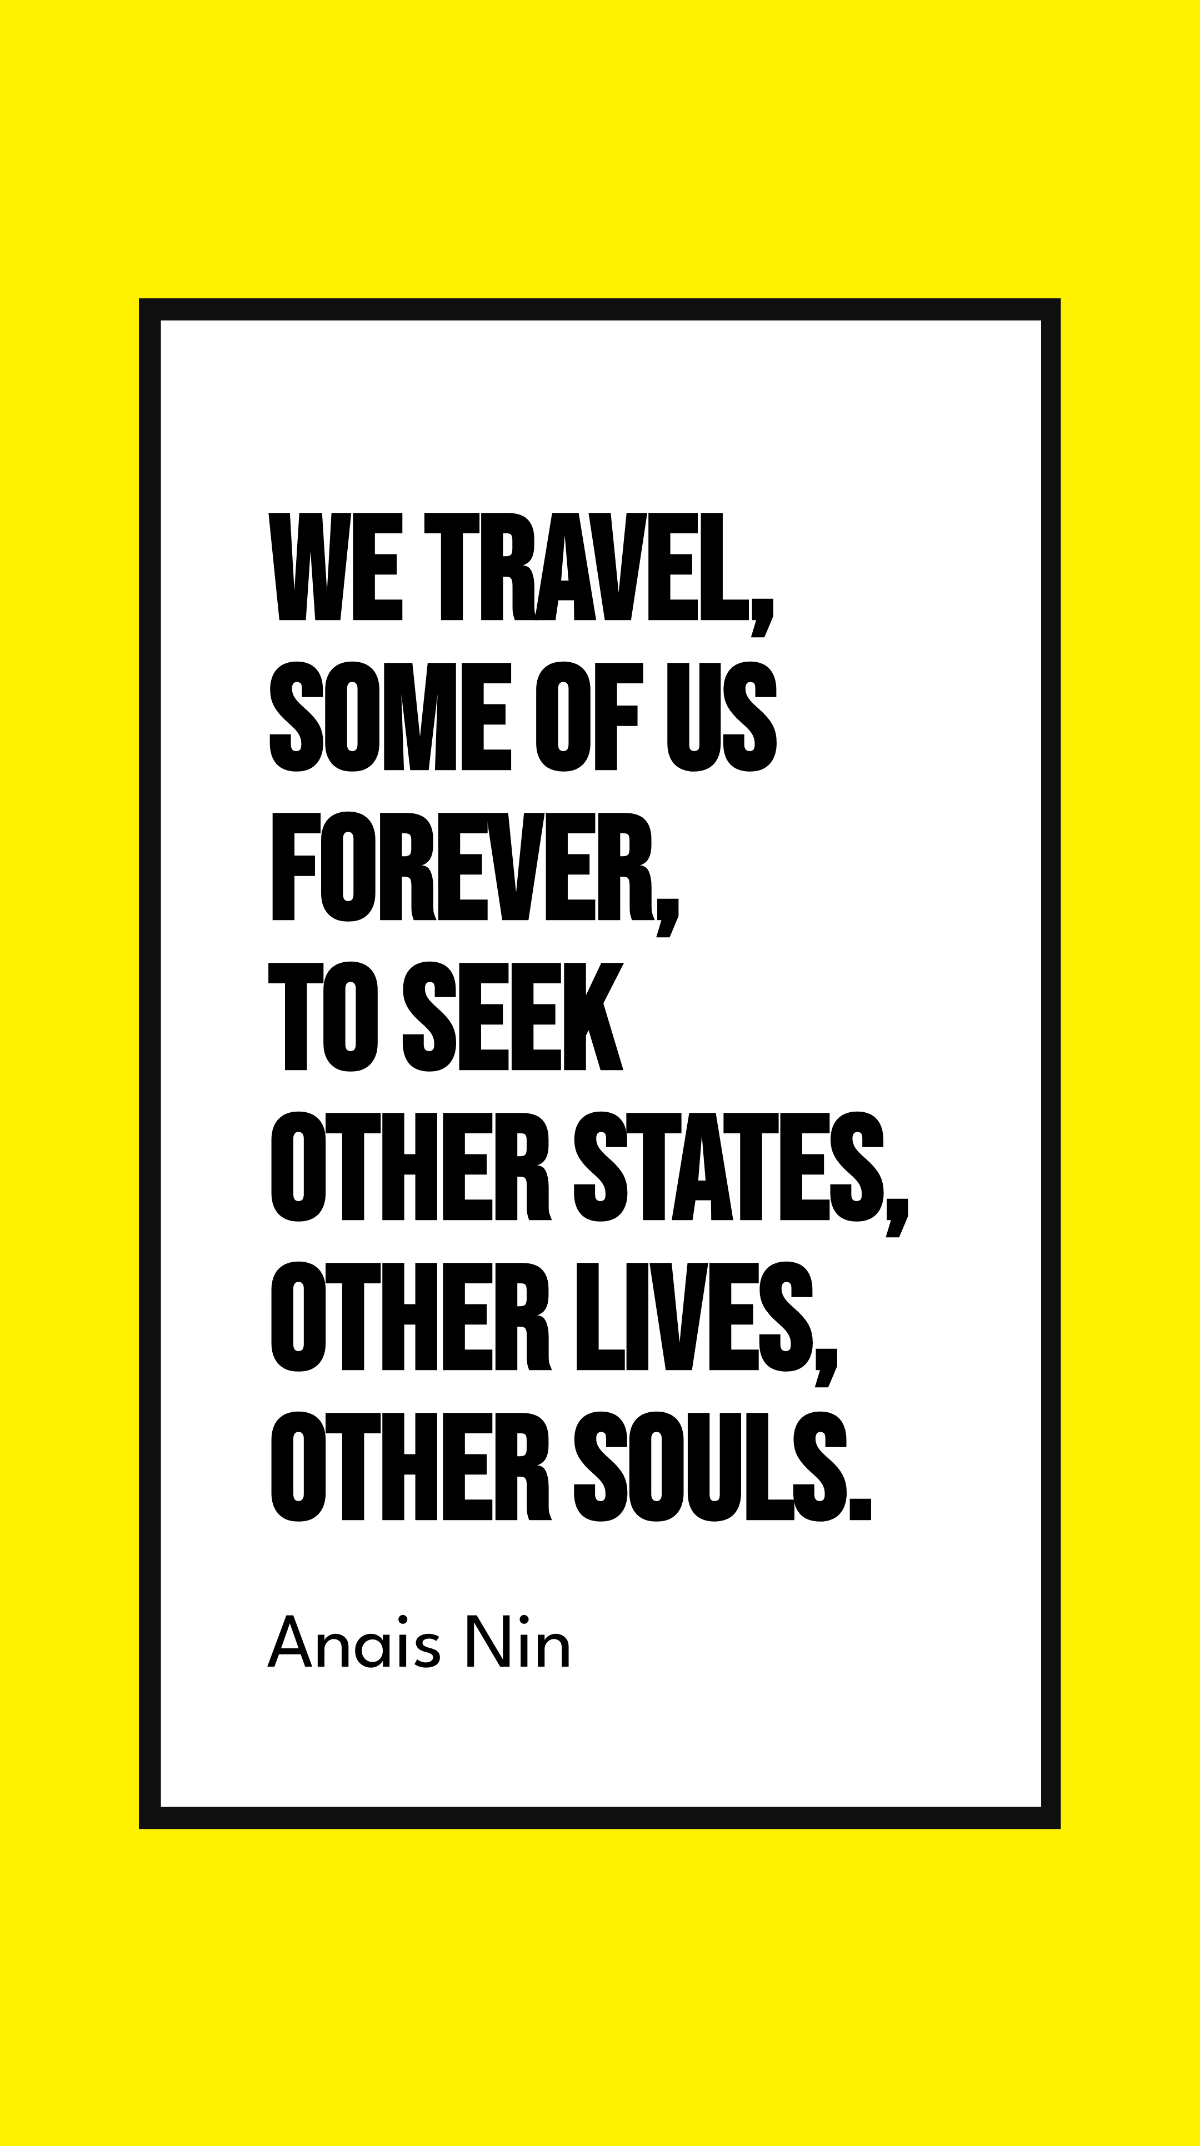 Anais Nin - We travel, some of us forever, to seek other states, other lives, other souls. Template